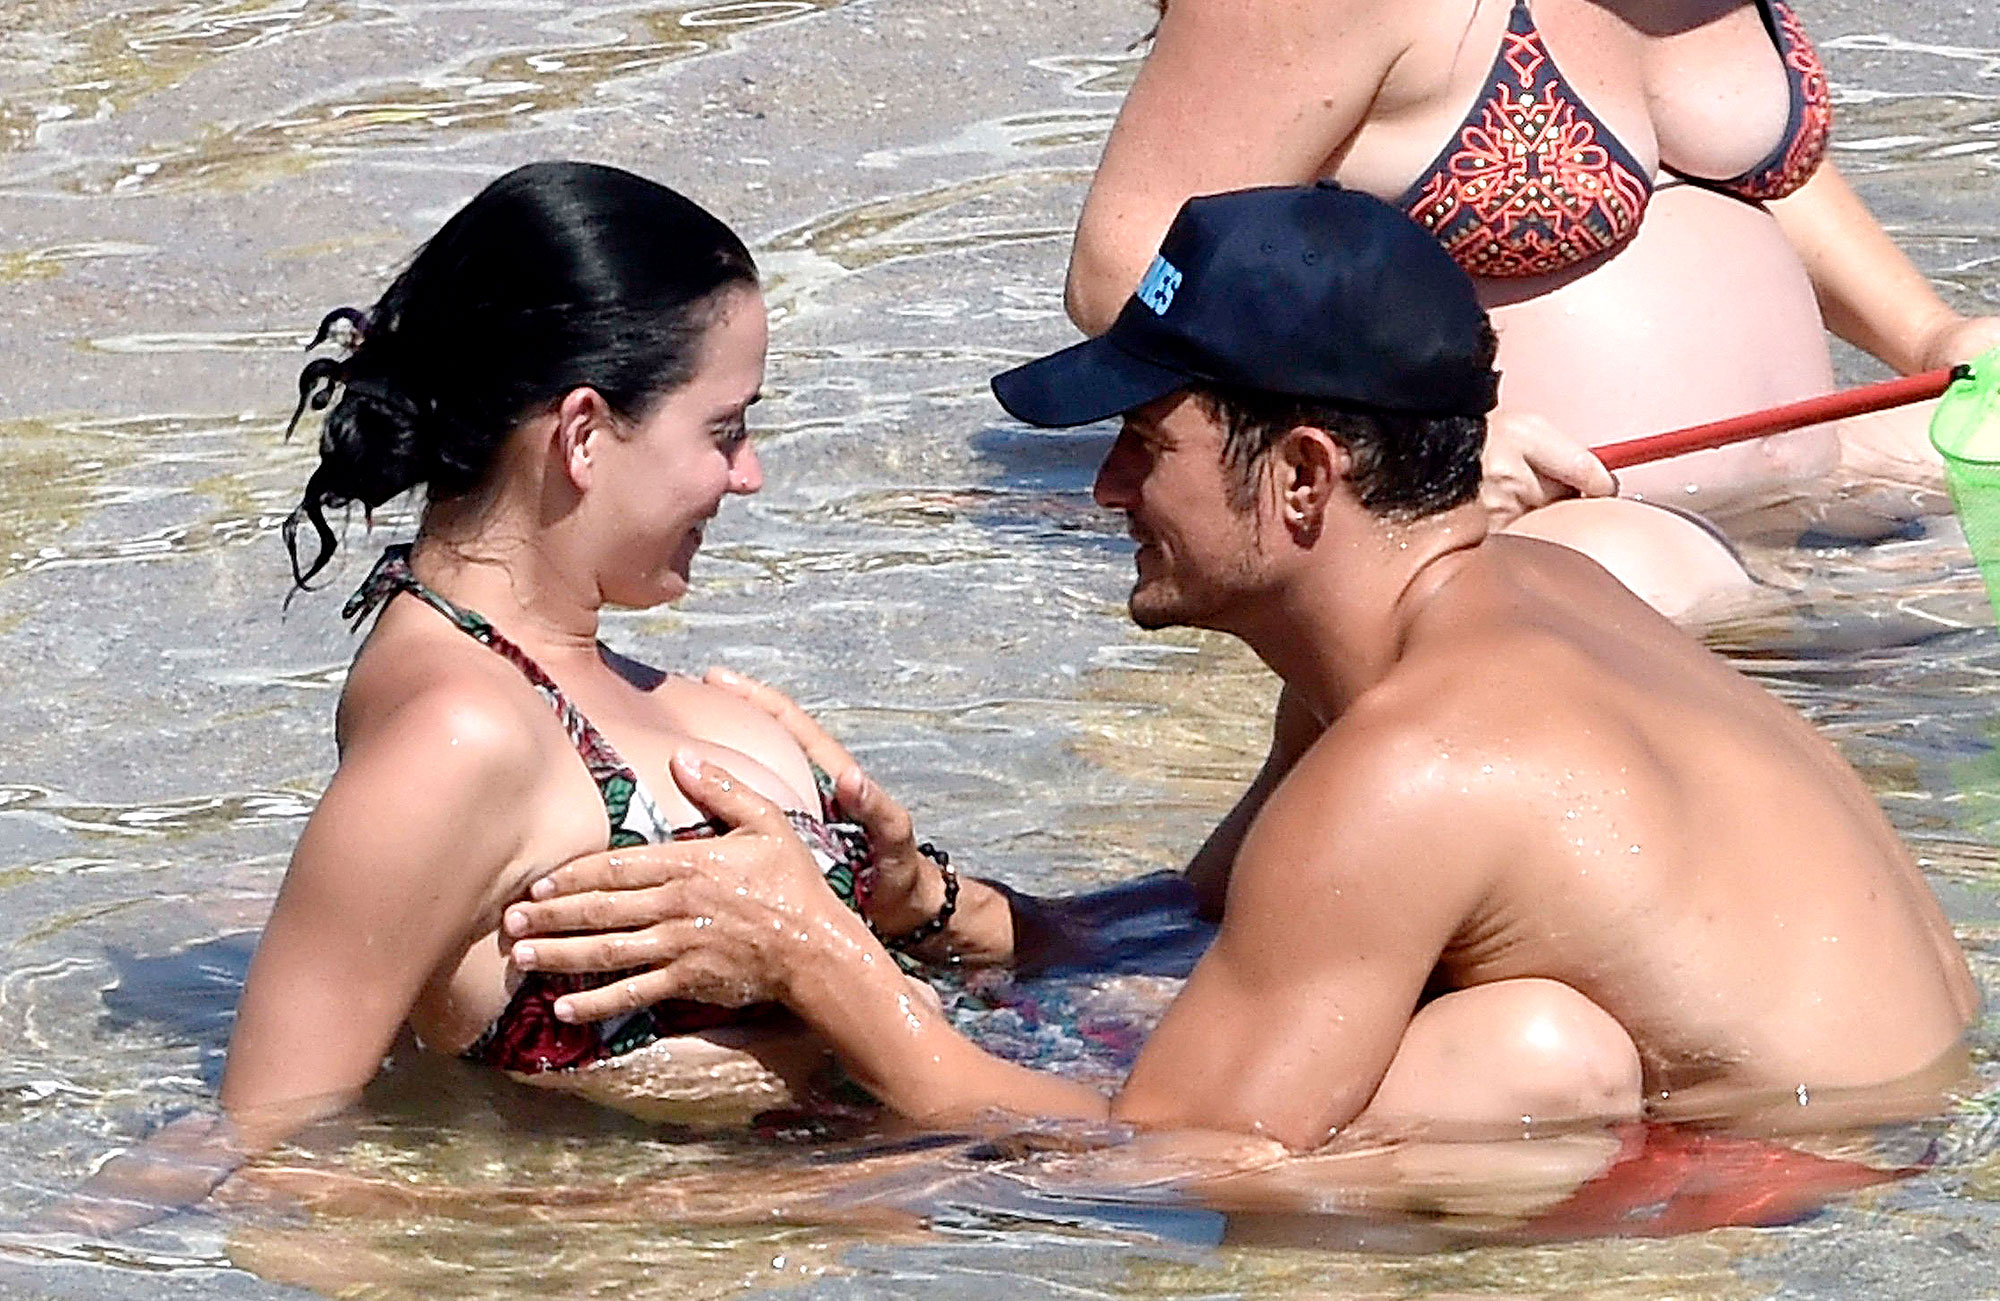 Beach Group Tits - Orlando Bloom Grabs Katy Perry's Boobs During Beach Vacation